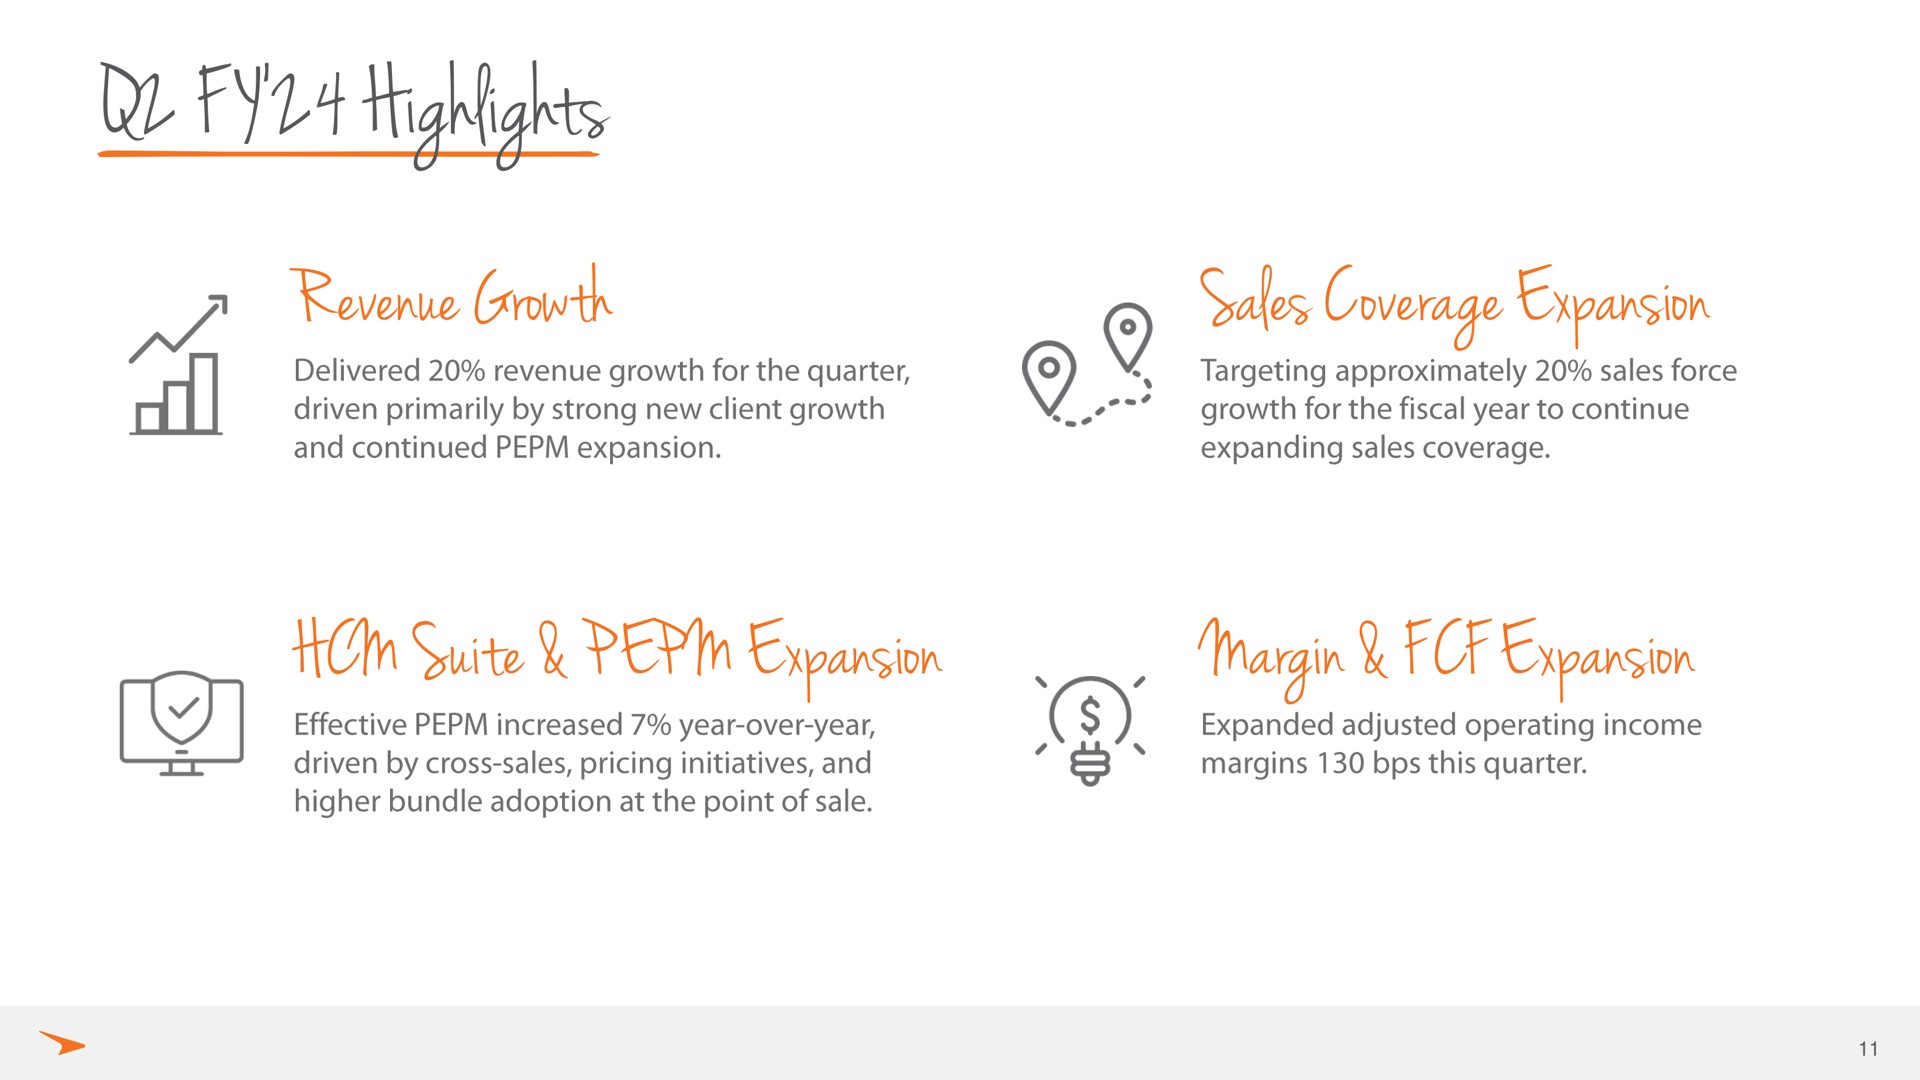 highlights revenue growth sales coverage expansion suite expansion margin expansion | Paycor